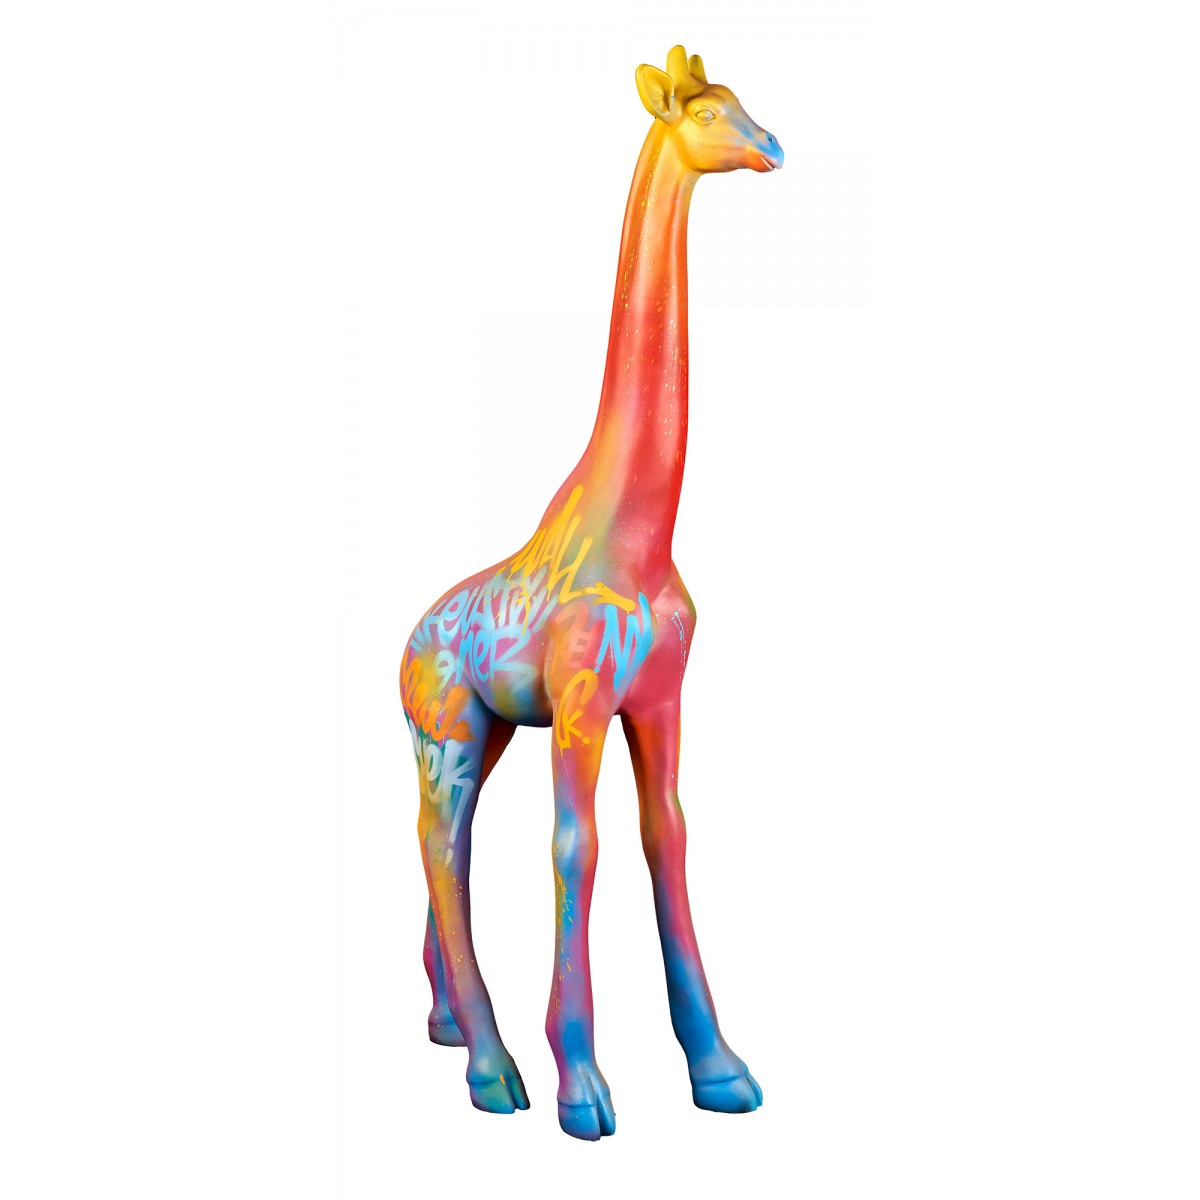 this quality For GIRAFFE in statue for your exterior, or opt interior